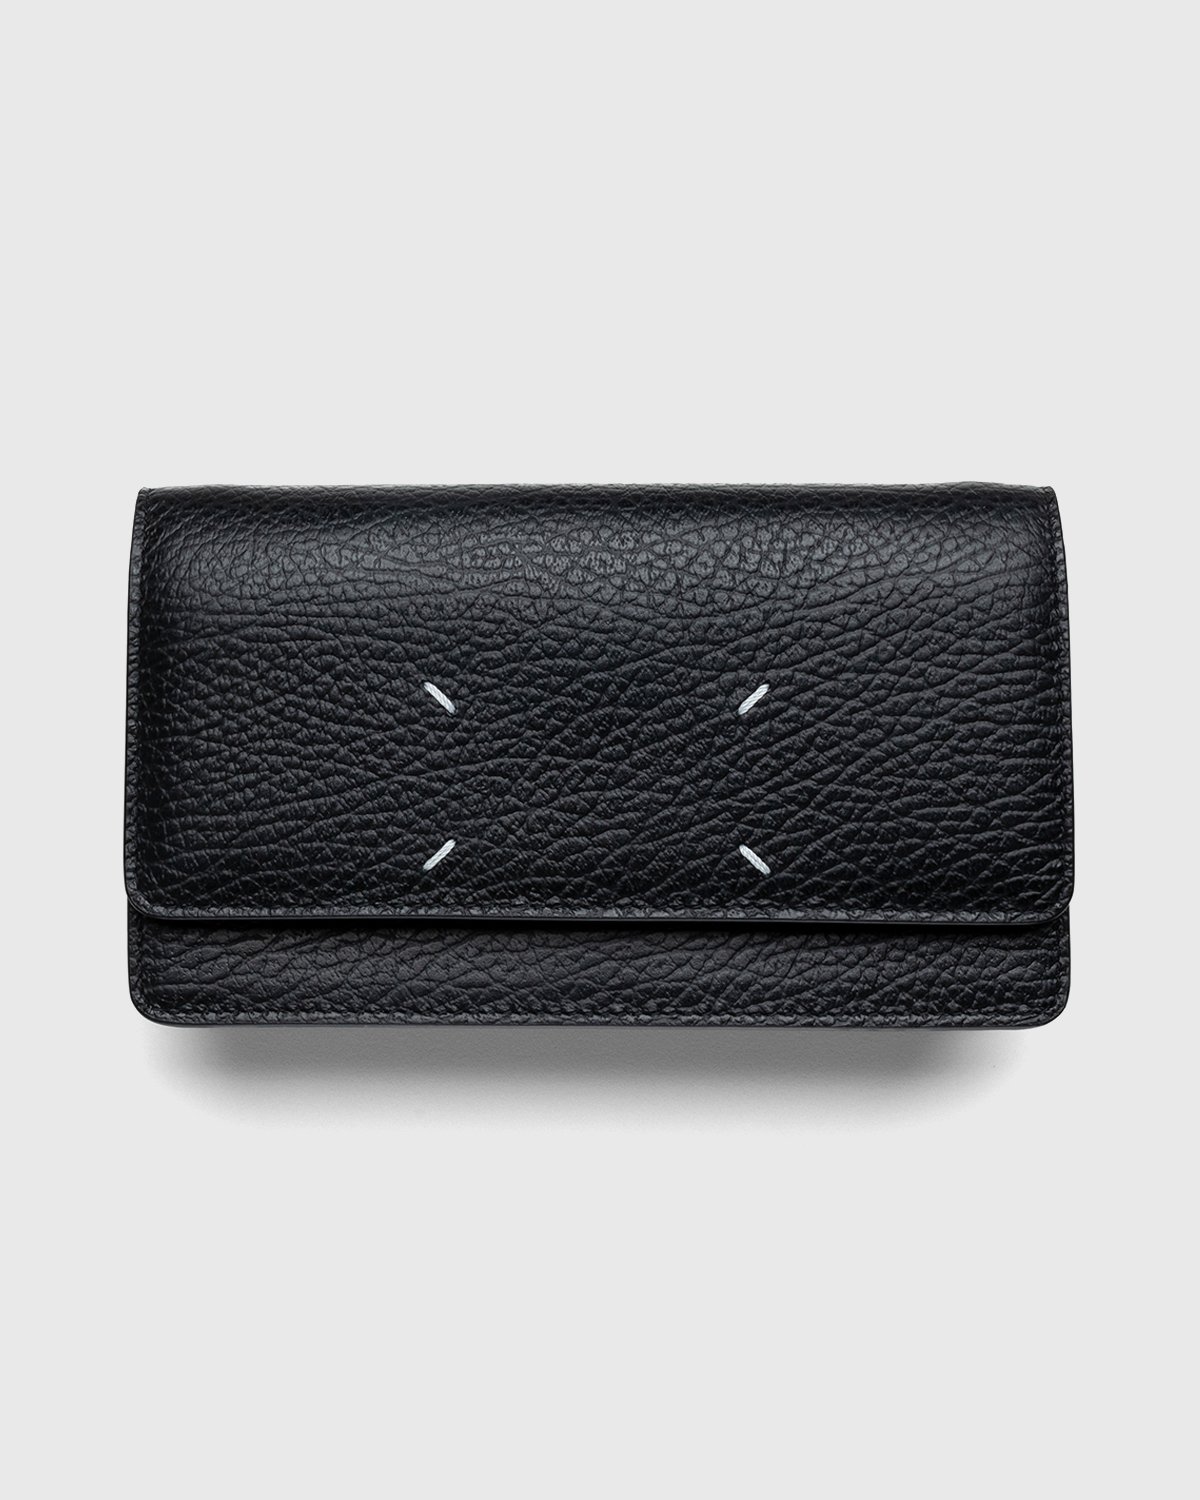 Maison Margiela - Leather Wallet With Chain Black - Accessories - Black - Image 3